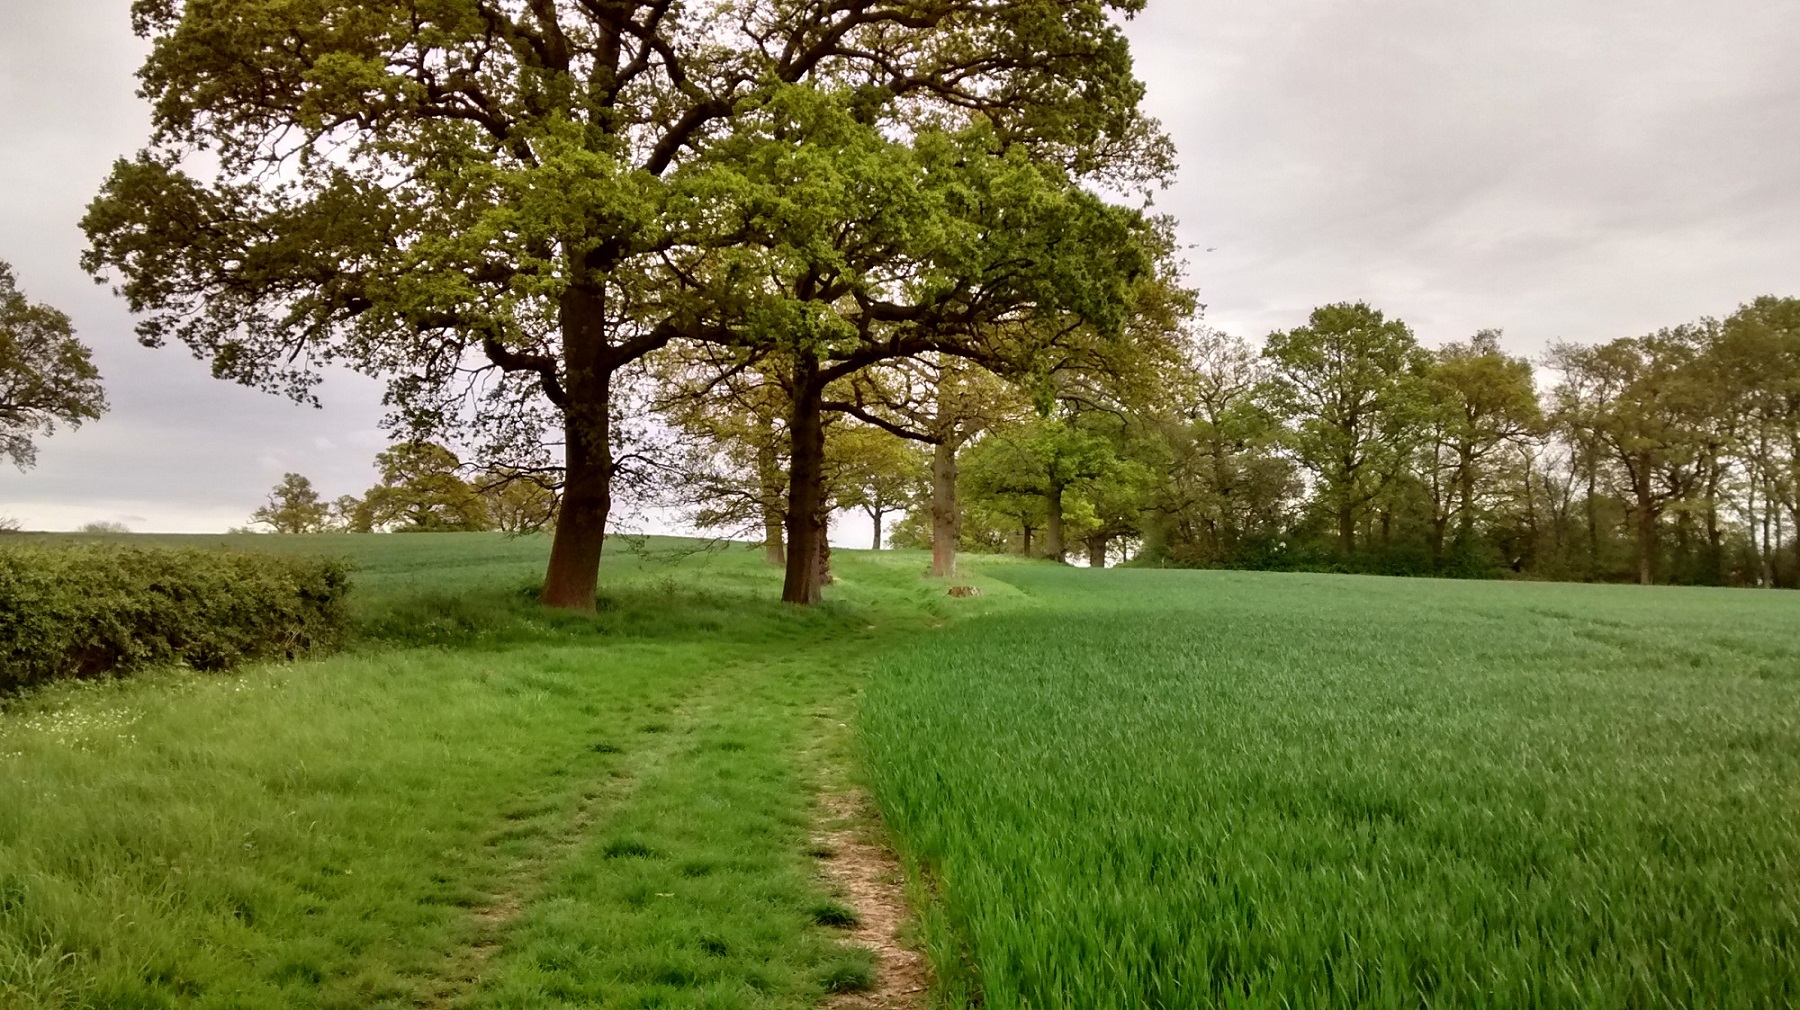 A grassy track rolls into the distance, past a stand of trees surrounded by open fields in the spring.